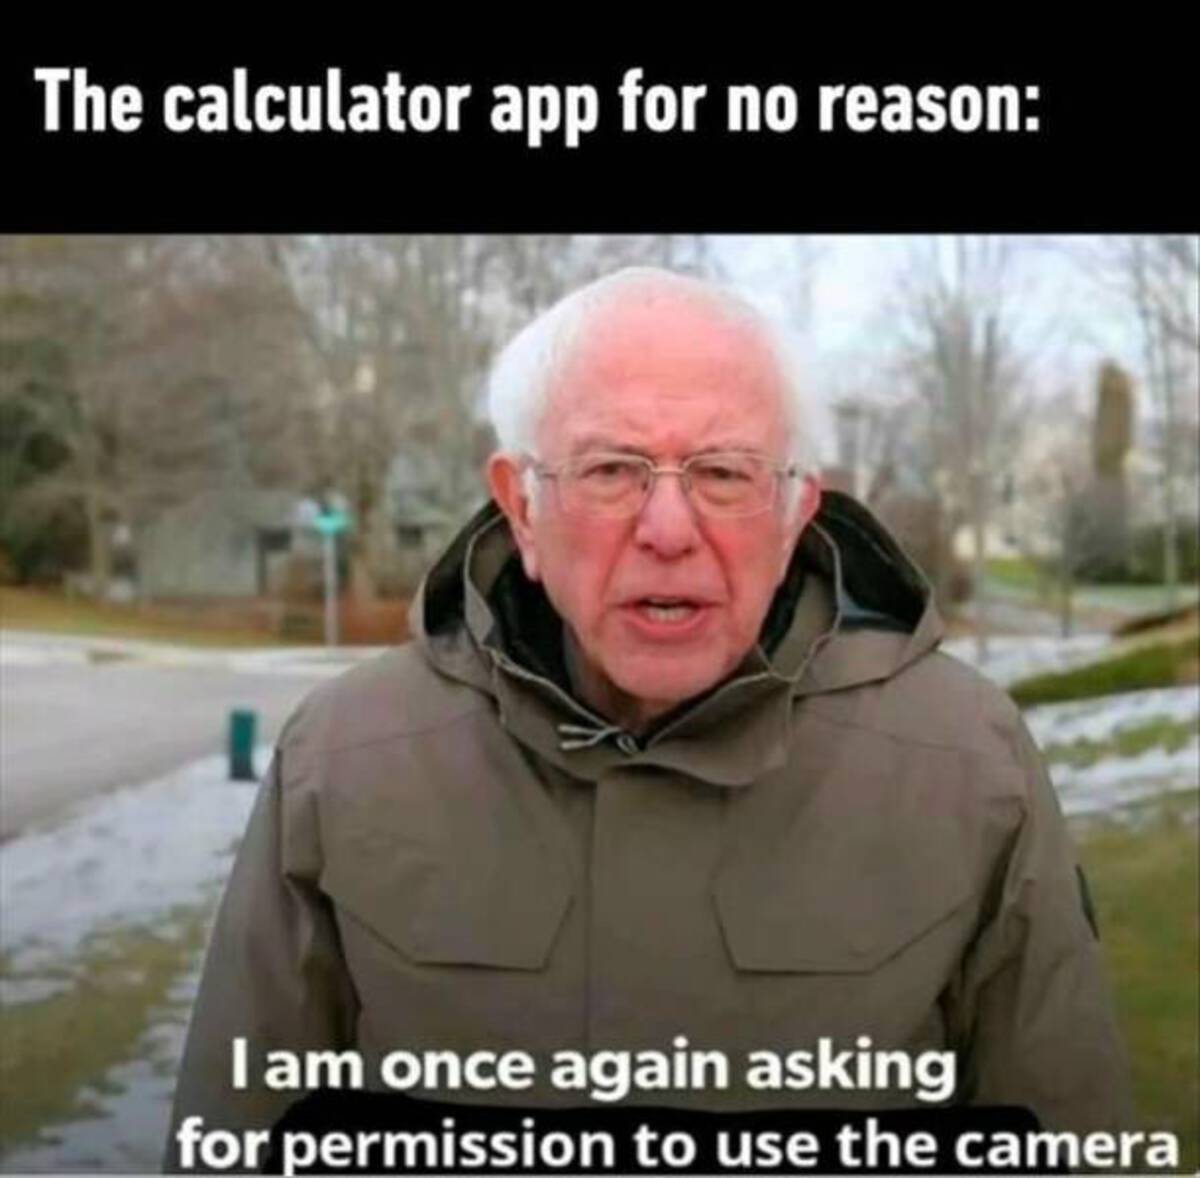 The calculator app for no reason I am once again asking for permission to use the camera